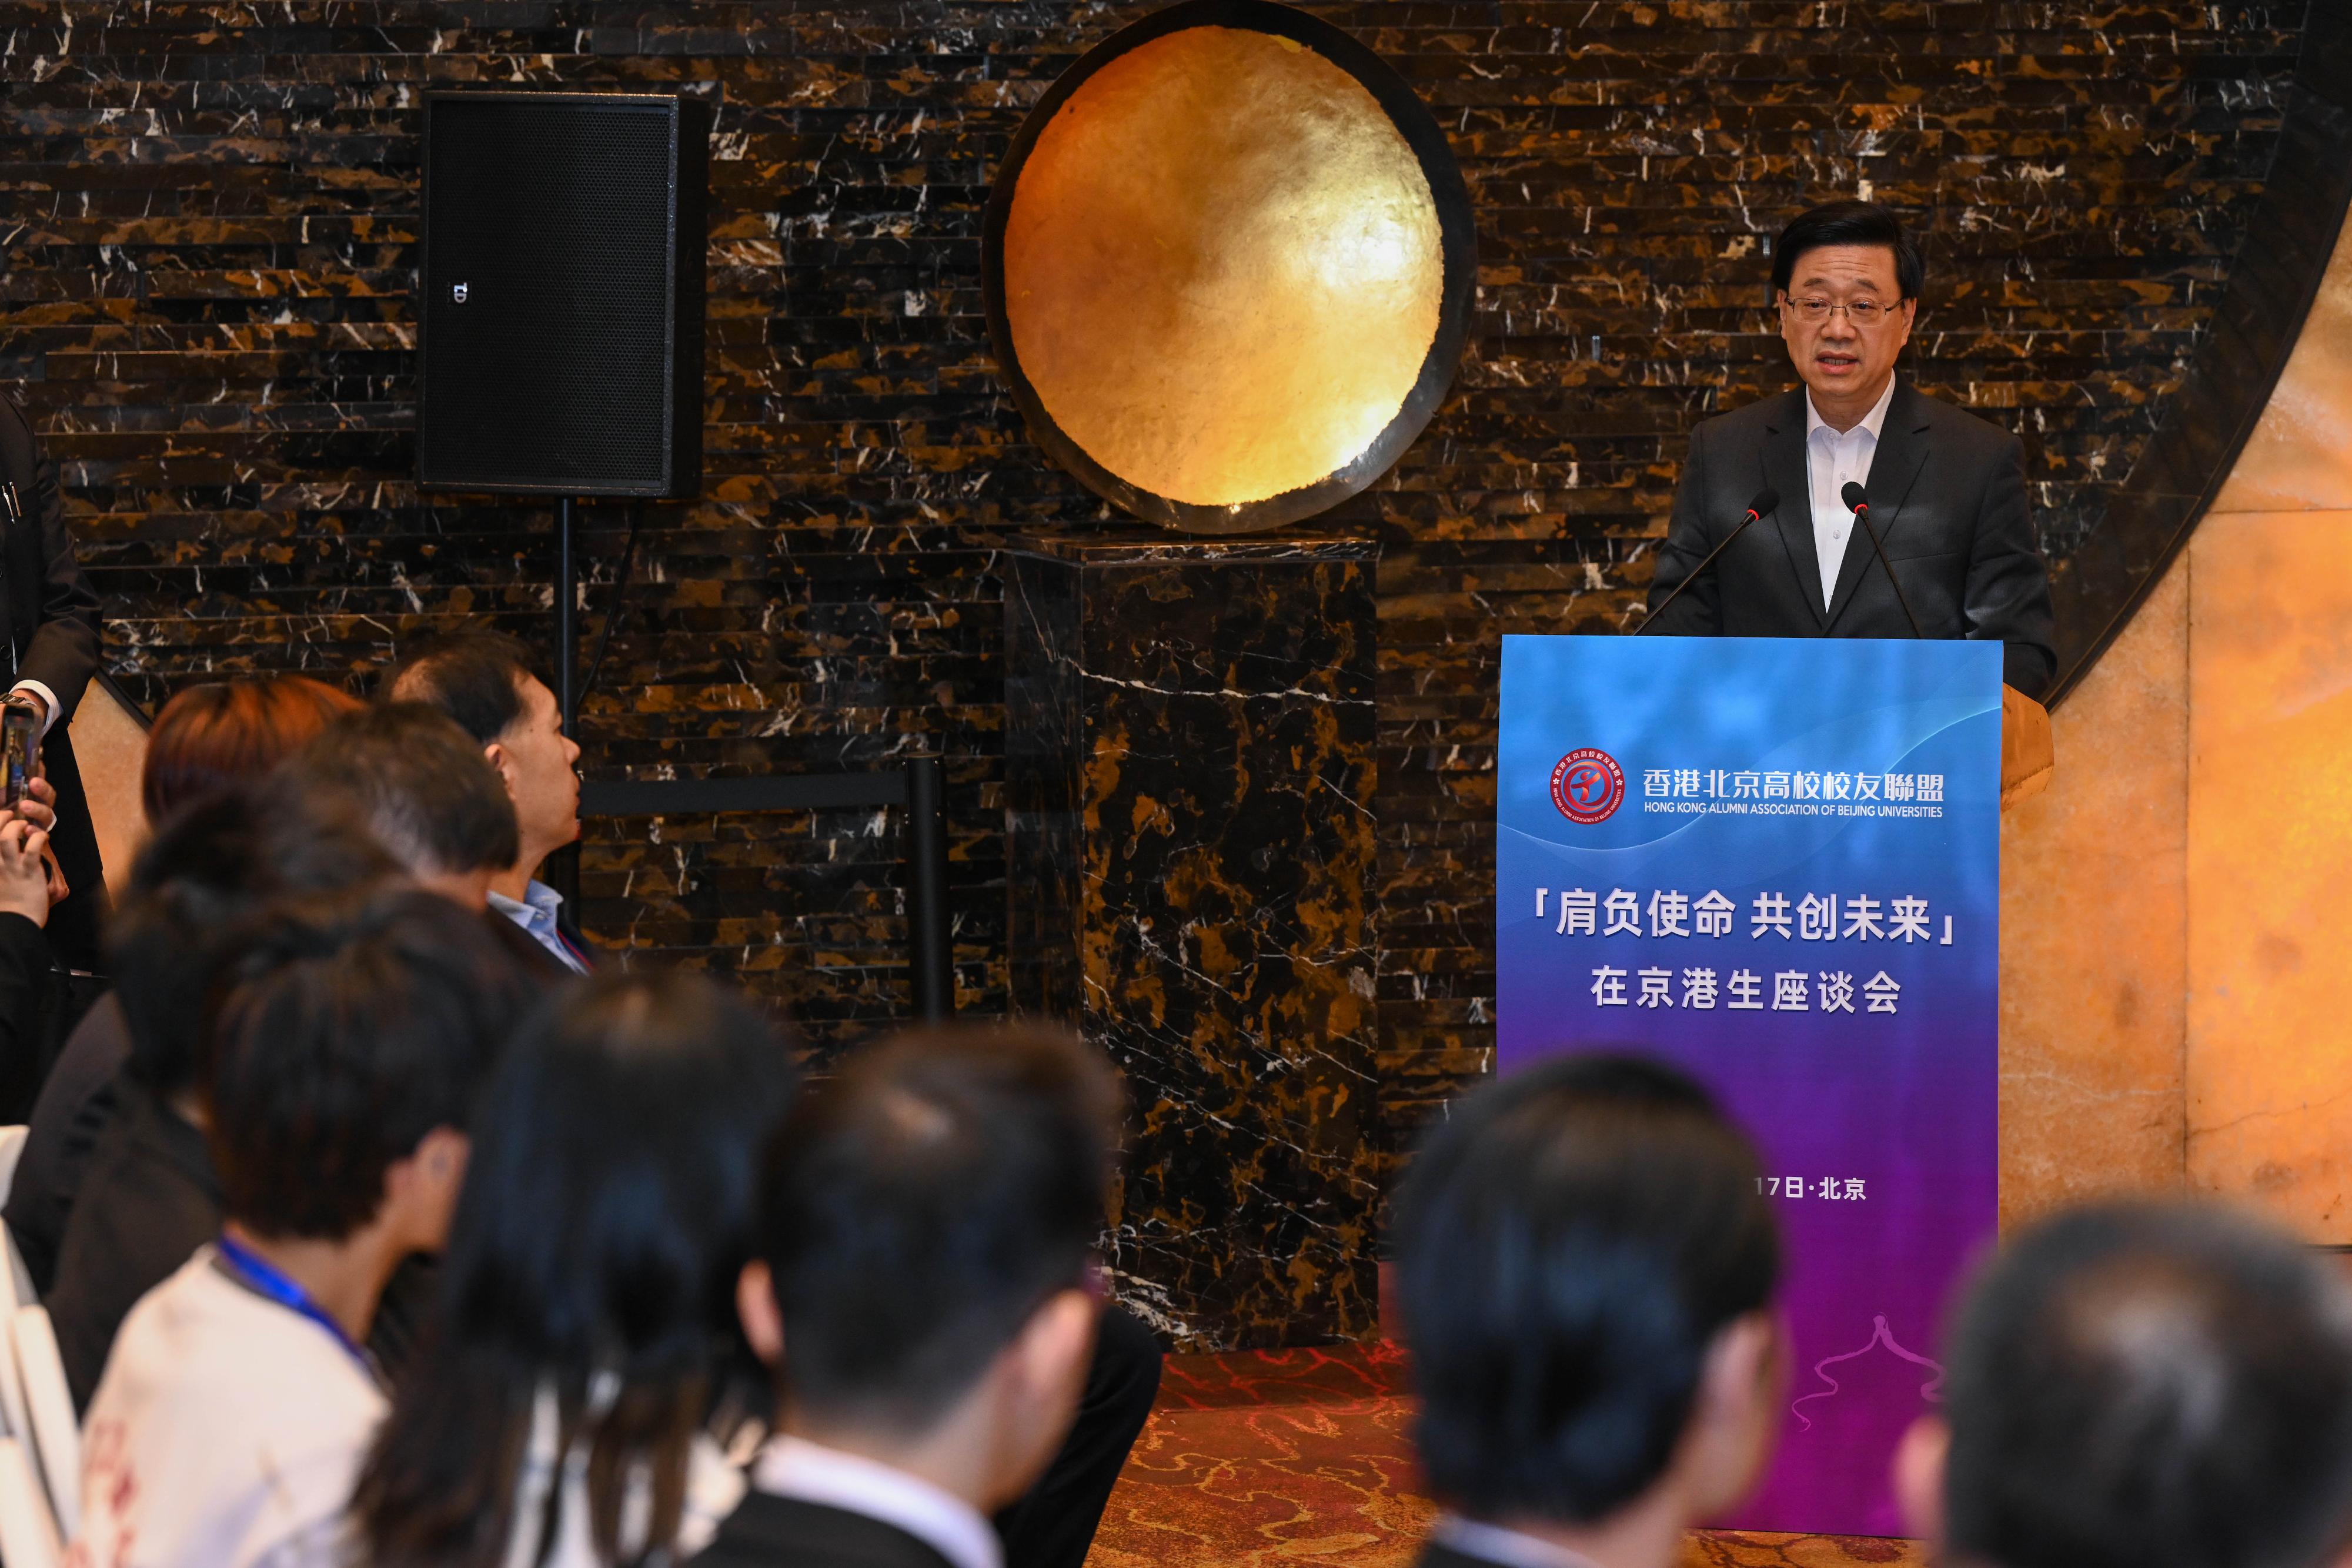 The Chief Executive, Mr John Lee,  attended a seminar organised by the Hong Kong Alumni Association of Beijing Universities in Beijing today (March 17). Photo shows Mr Lee delivering a speech.